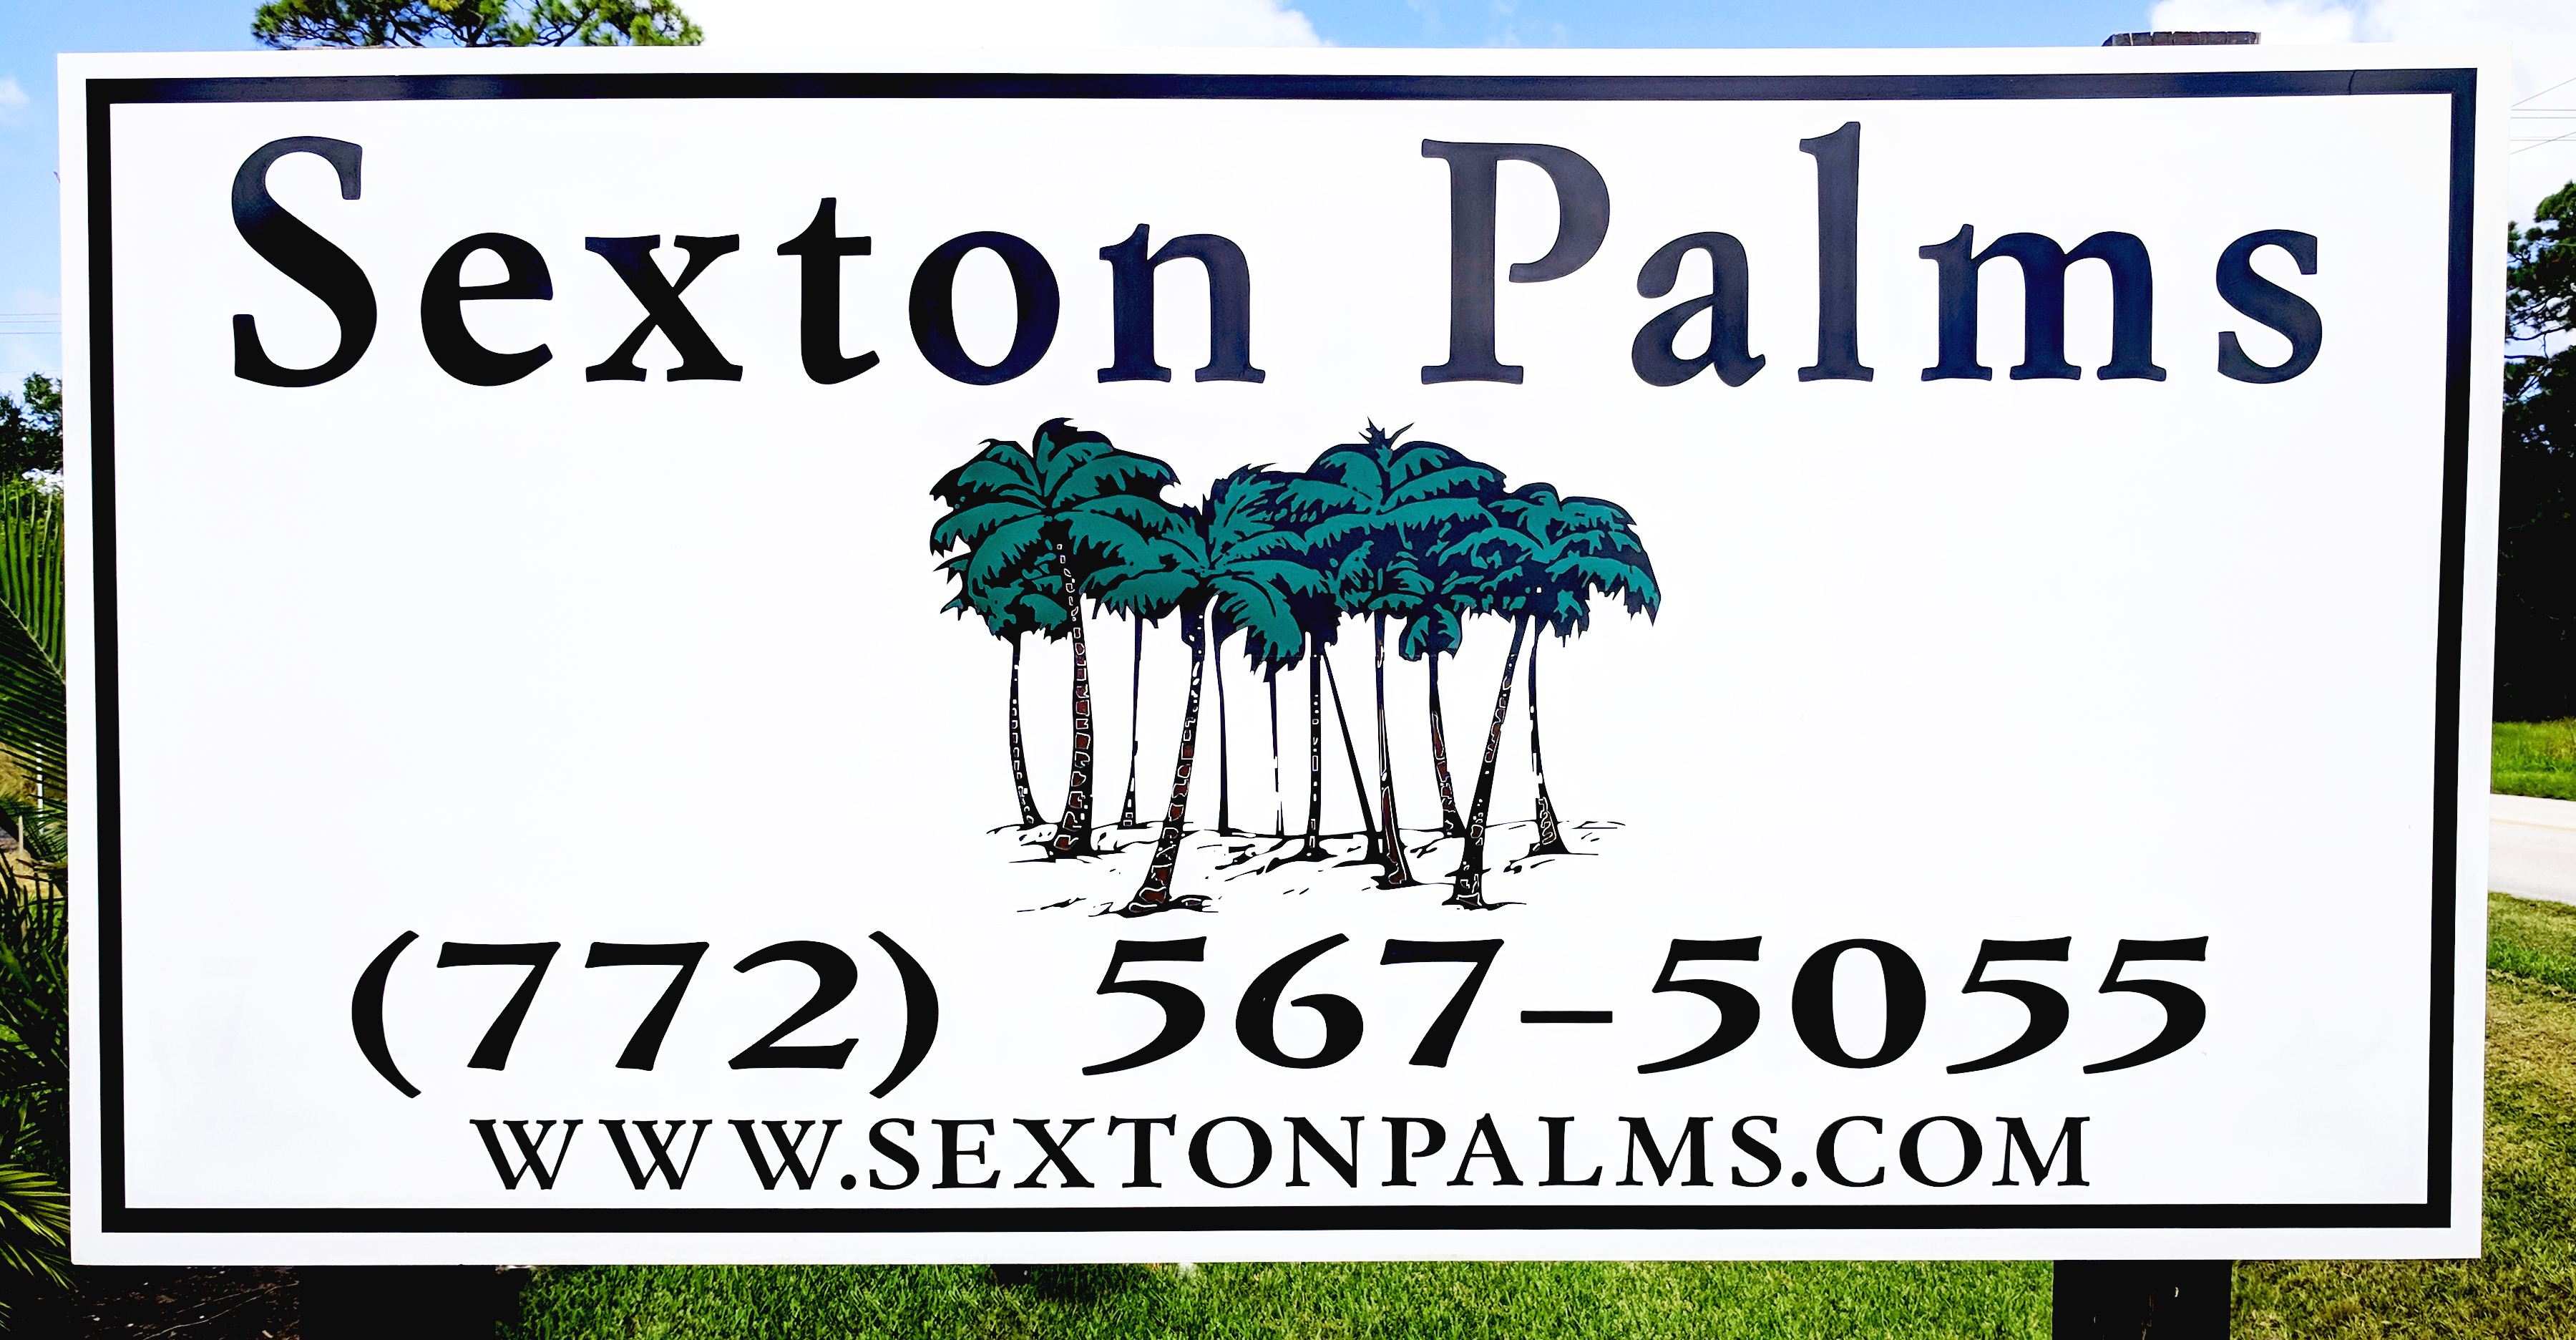 Photo of road sign with palm tree images and the text: Sexton Palms, (772) 567-5055, www.sextonpalms.com